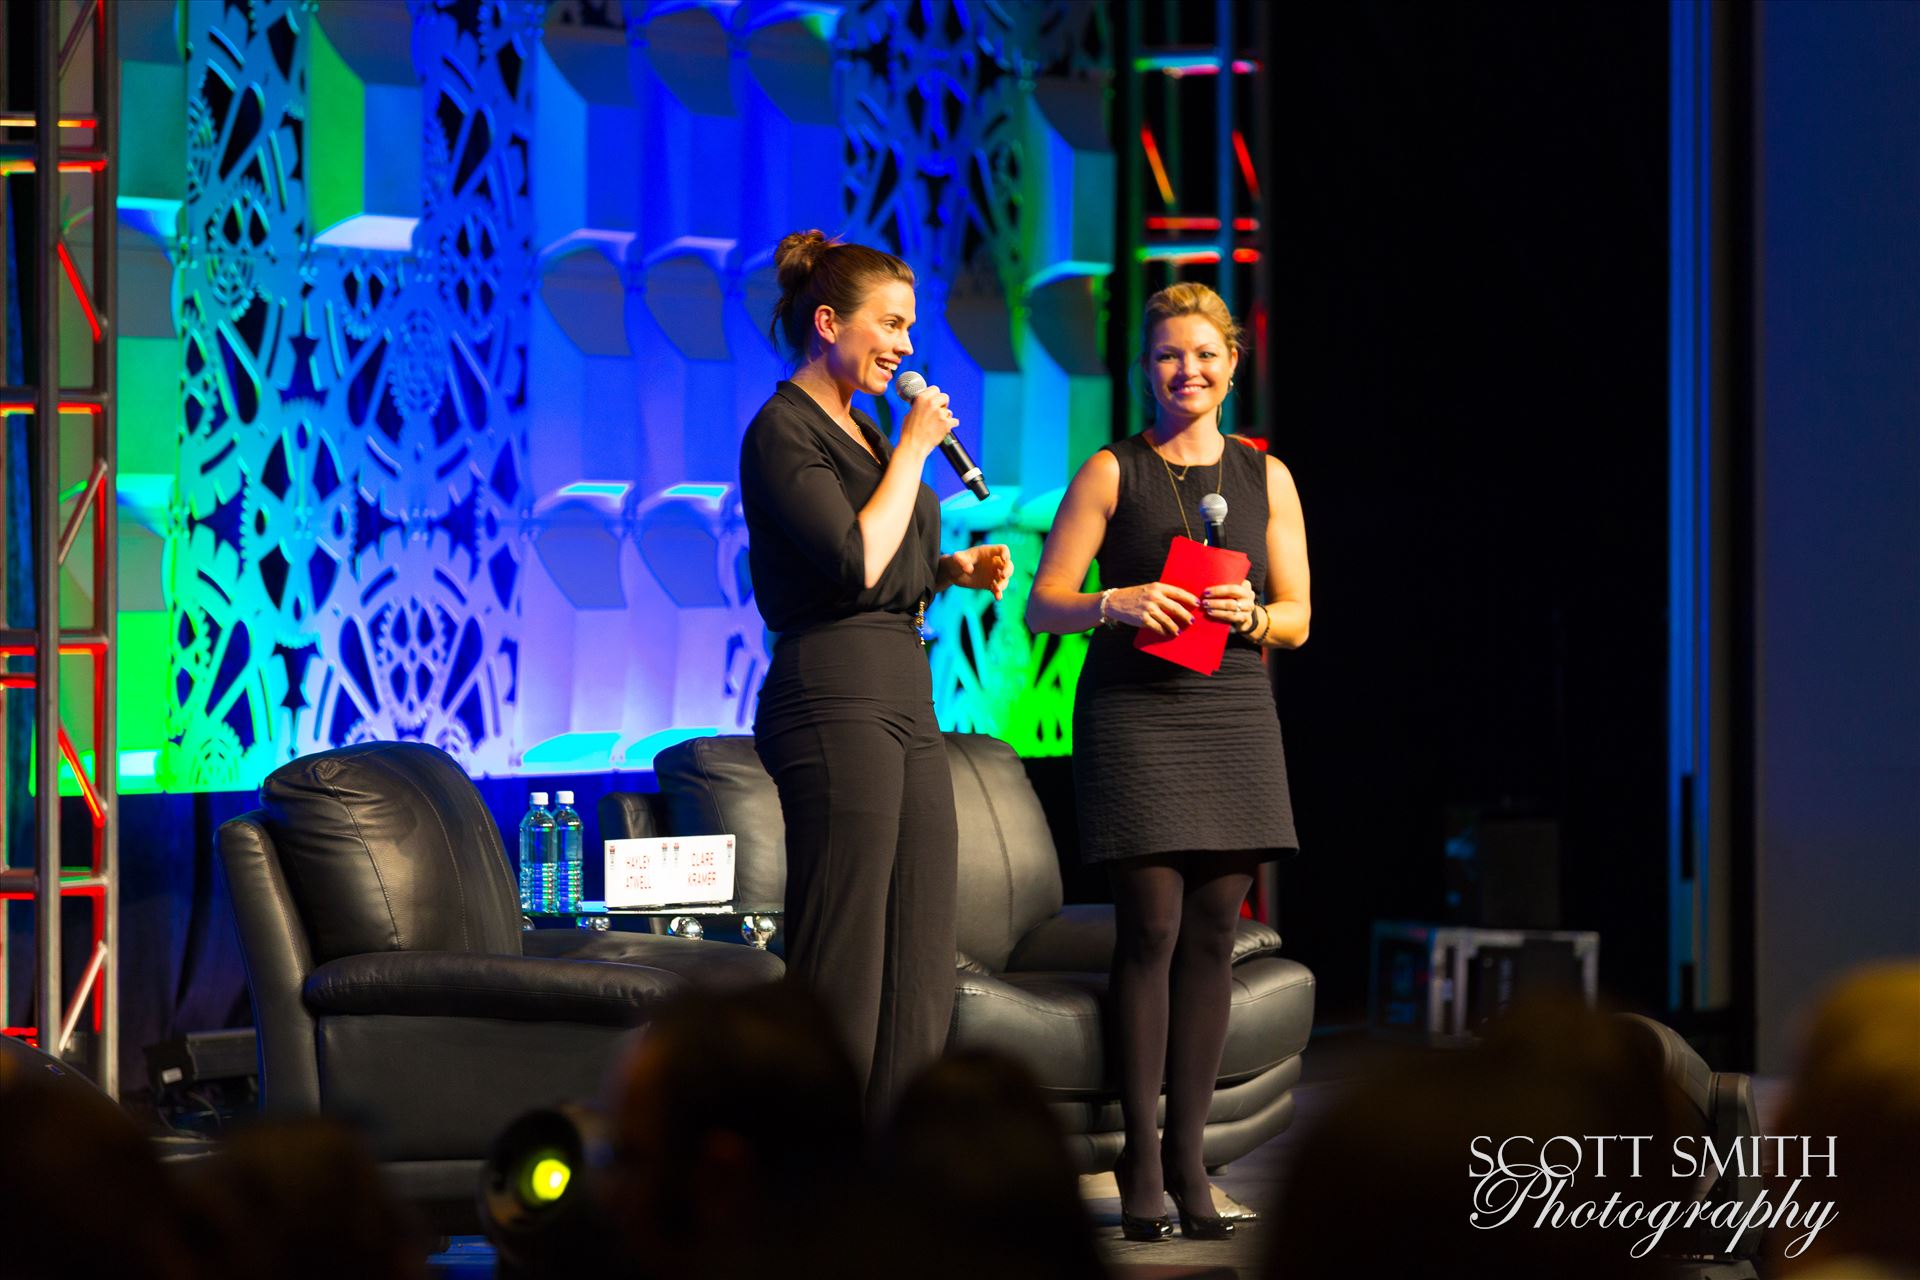 Denver Comic Con 2016 21 Denver Comic Con 2016 at the Colorado Convention Center. Clare Kramer and Haley Atwell. by Scott Smith Photos